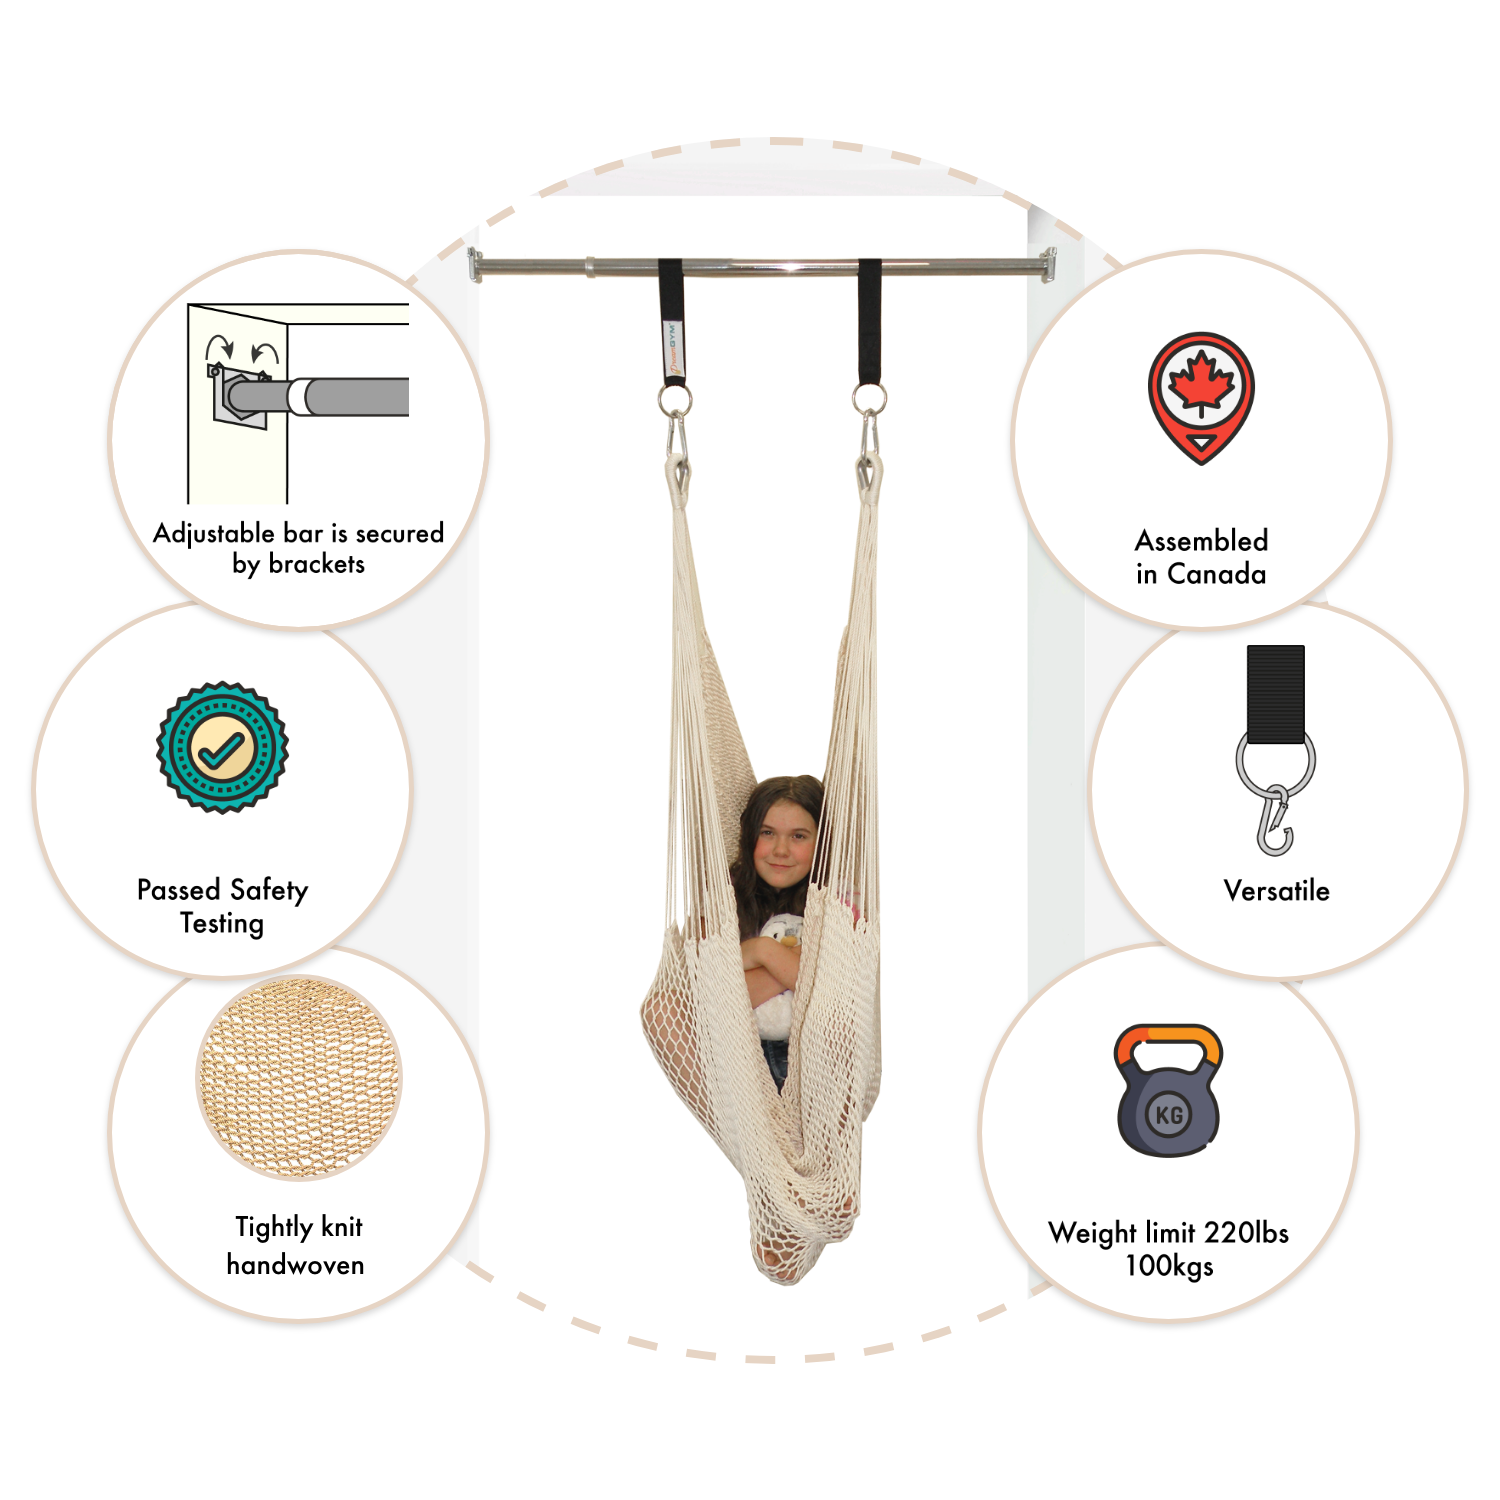 Doorway Hammock swing with features and benefits listed: adjustable bar is secured by brackets, passed safety testing, tightly knit handwoven, assembled in Canada, versatile, weight limit 220lbs/ 100kgs